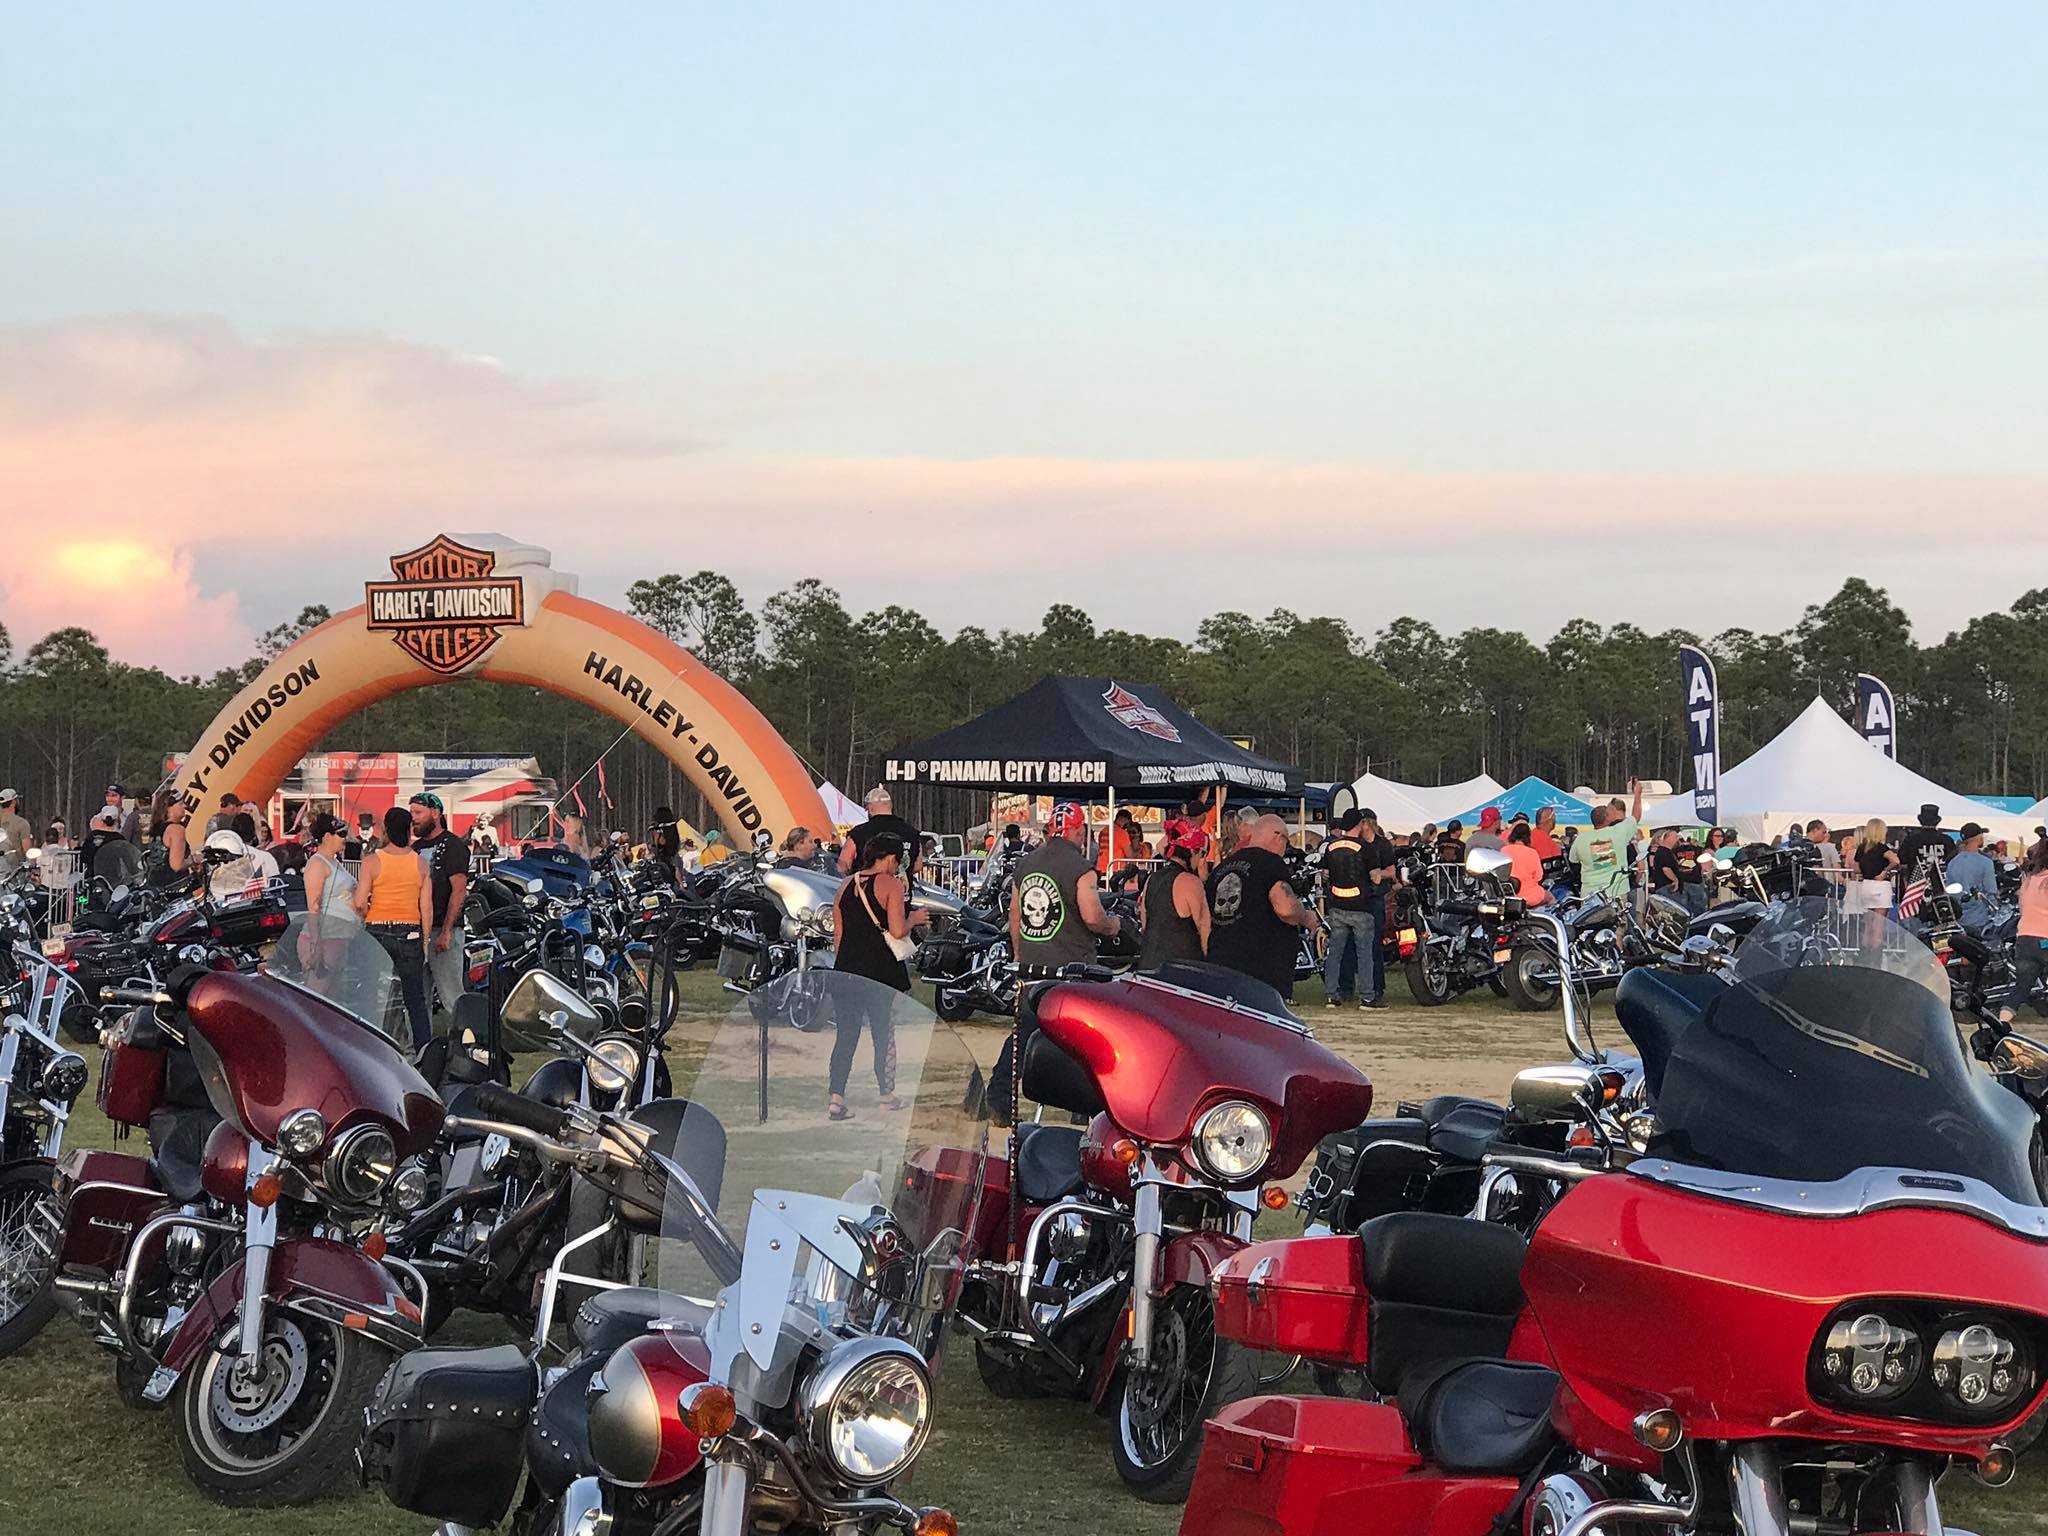 Panama Beach is the scene of the Fall 2023 Thunder Beach Motorcycle Rally, sponsored by Law Tigers